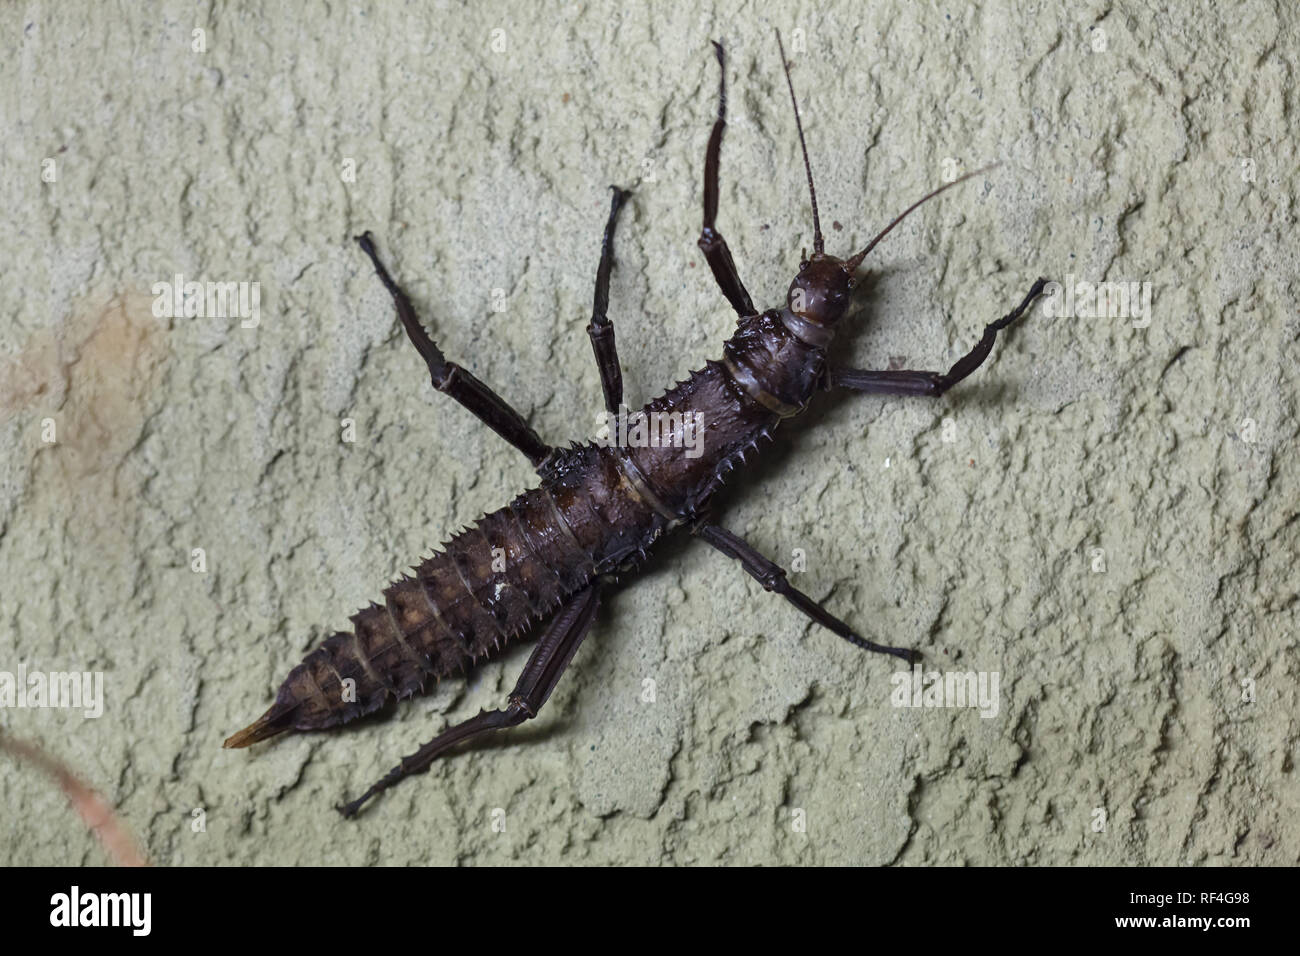 Thorny devil stick insect (Eurycantha calcarata), also known as the giant spiny stick insect. Stock Photo